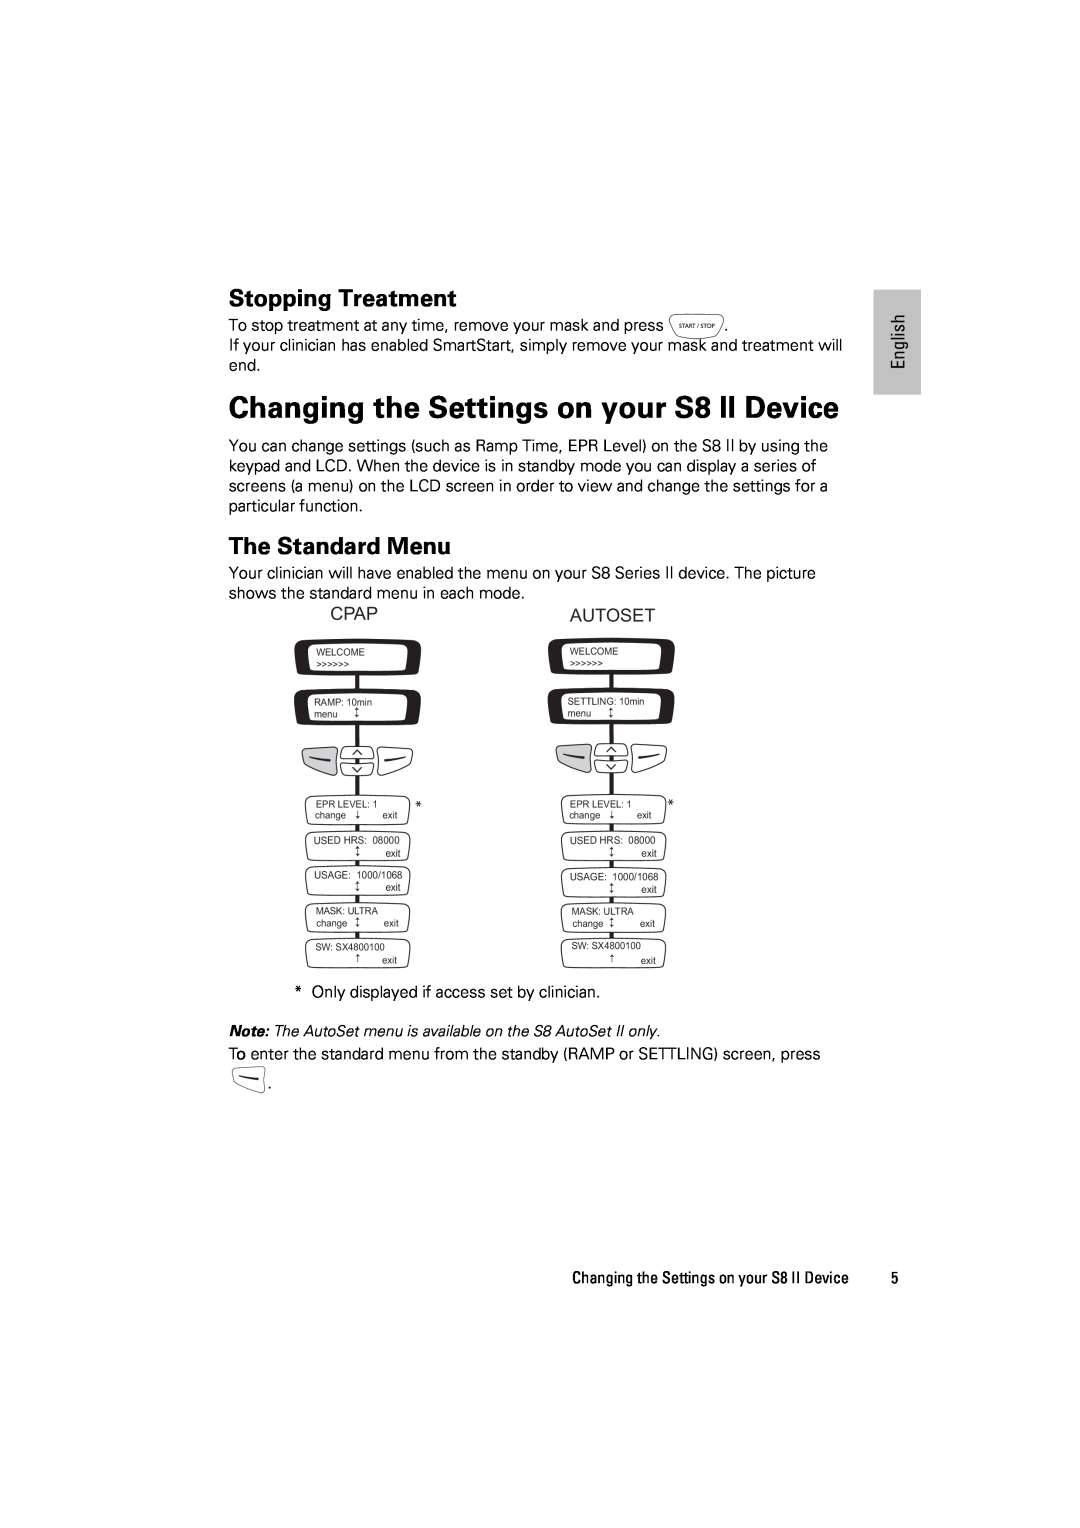 ResMed s8 manual Changing the Settings on your S8 II Device, Stopping Treatment, The Standard Menu, English 